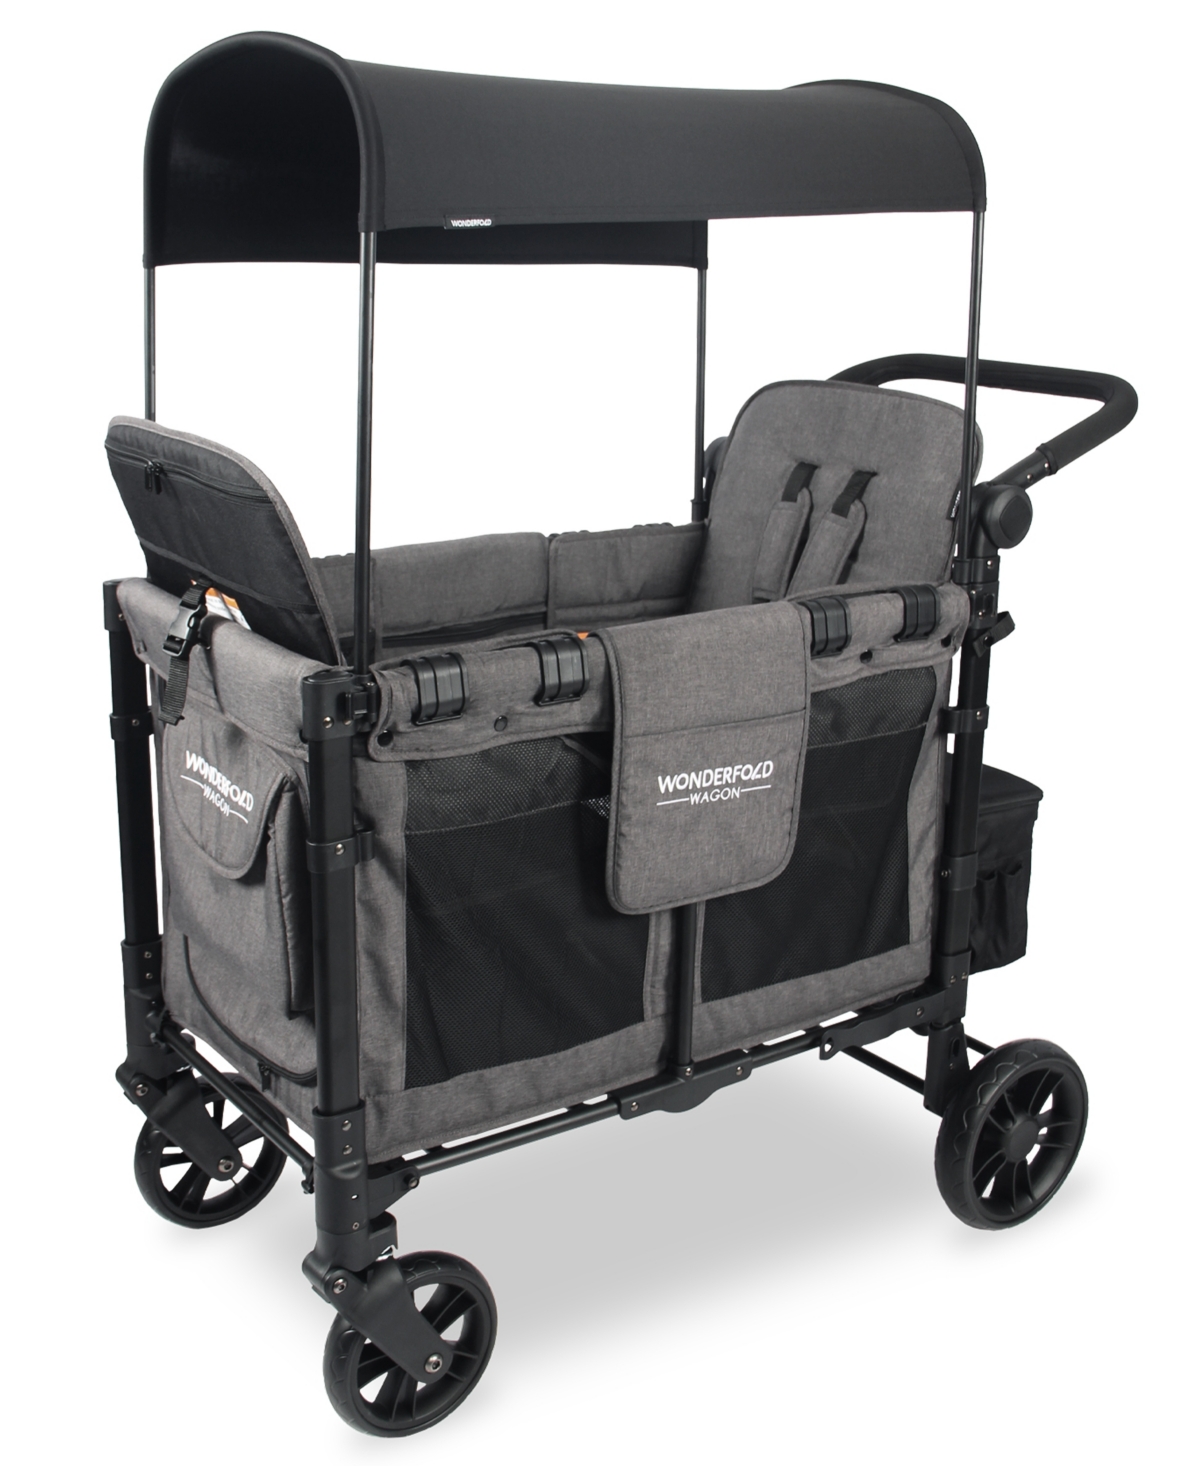 Wonderfold Wagon W2 Elite Front Zippered Double Stroller Wagon In Charcoal Gray